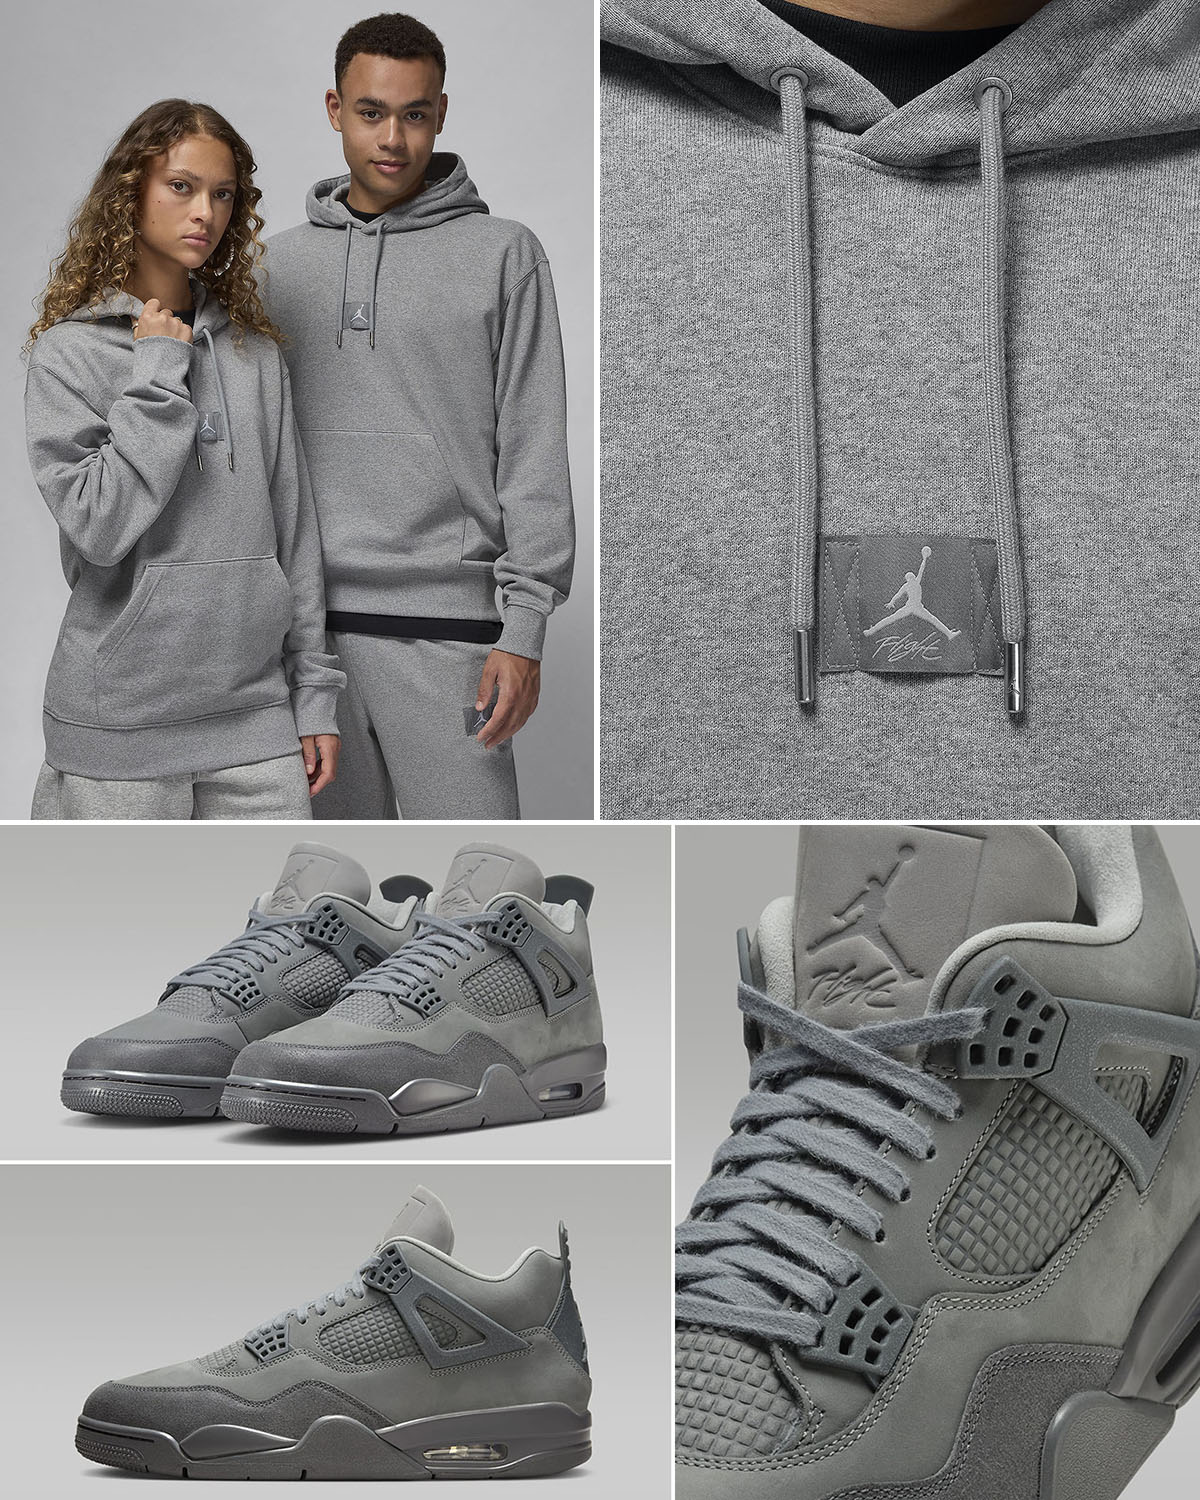 Creates a Luxury Union LA x Air university jordan and You Can Own a Pair for $4 Hoodie Match